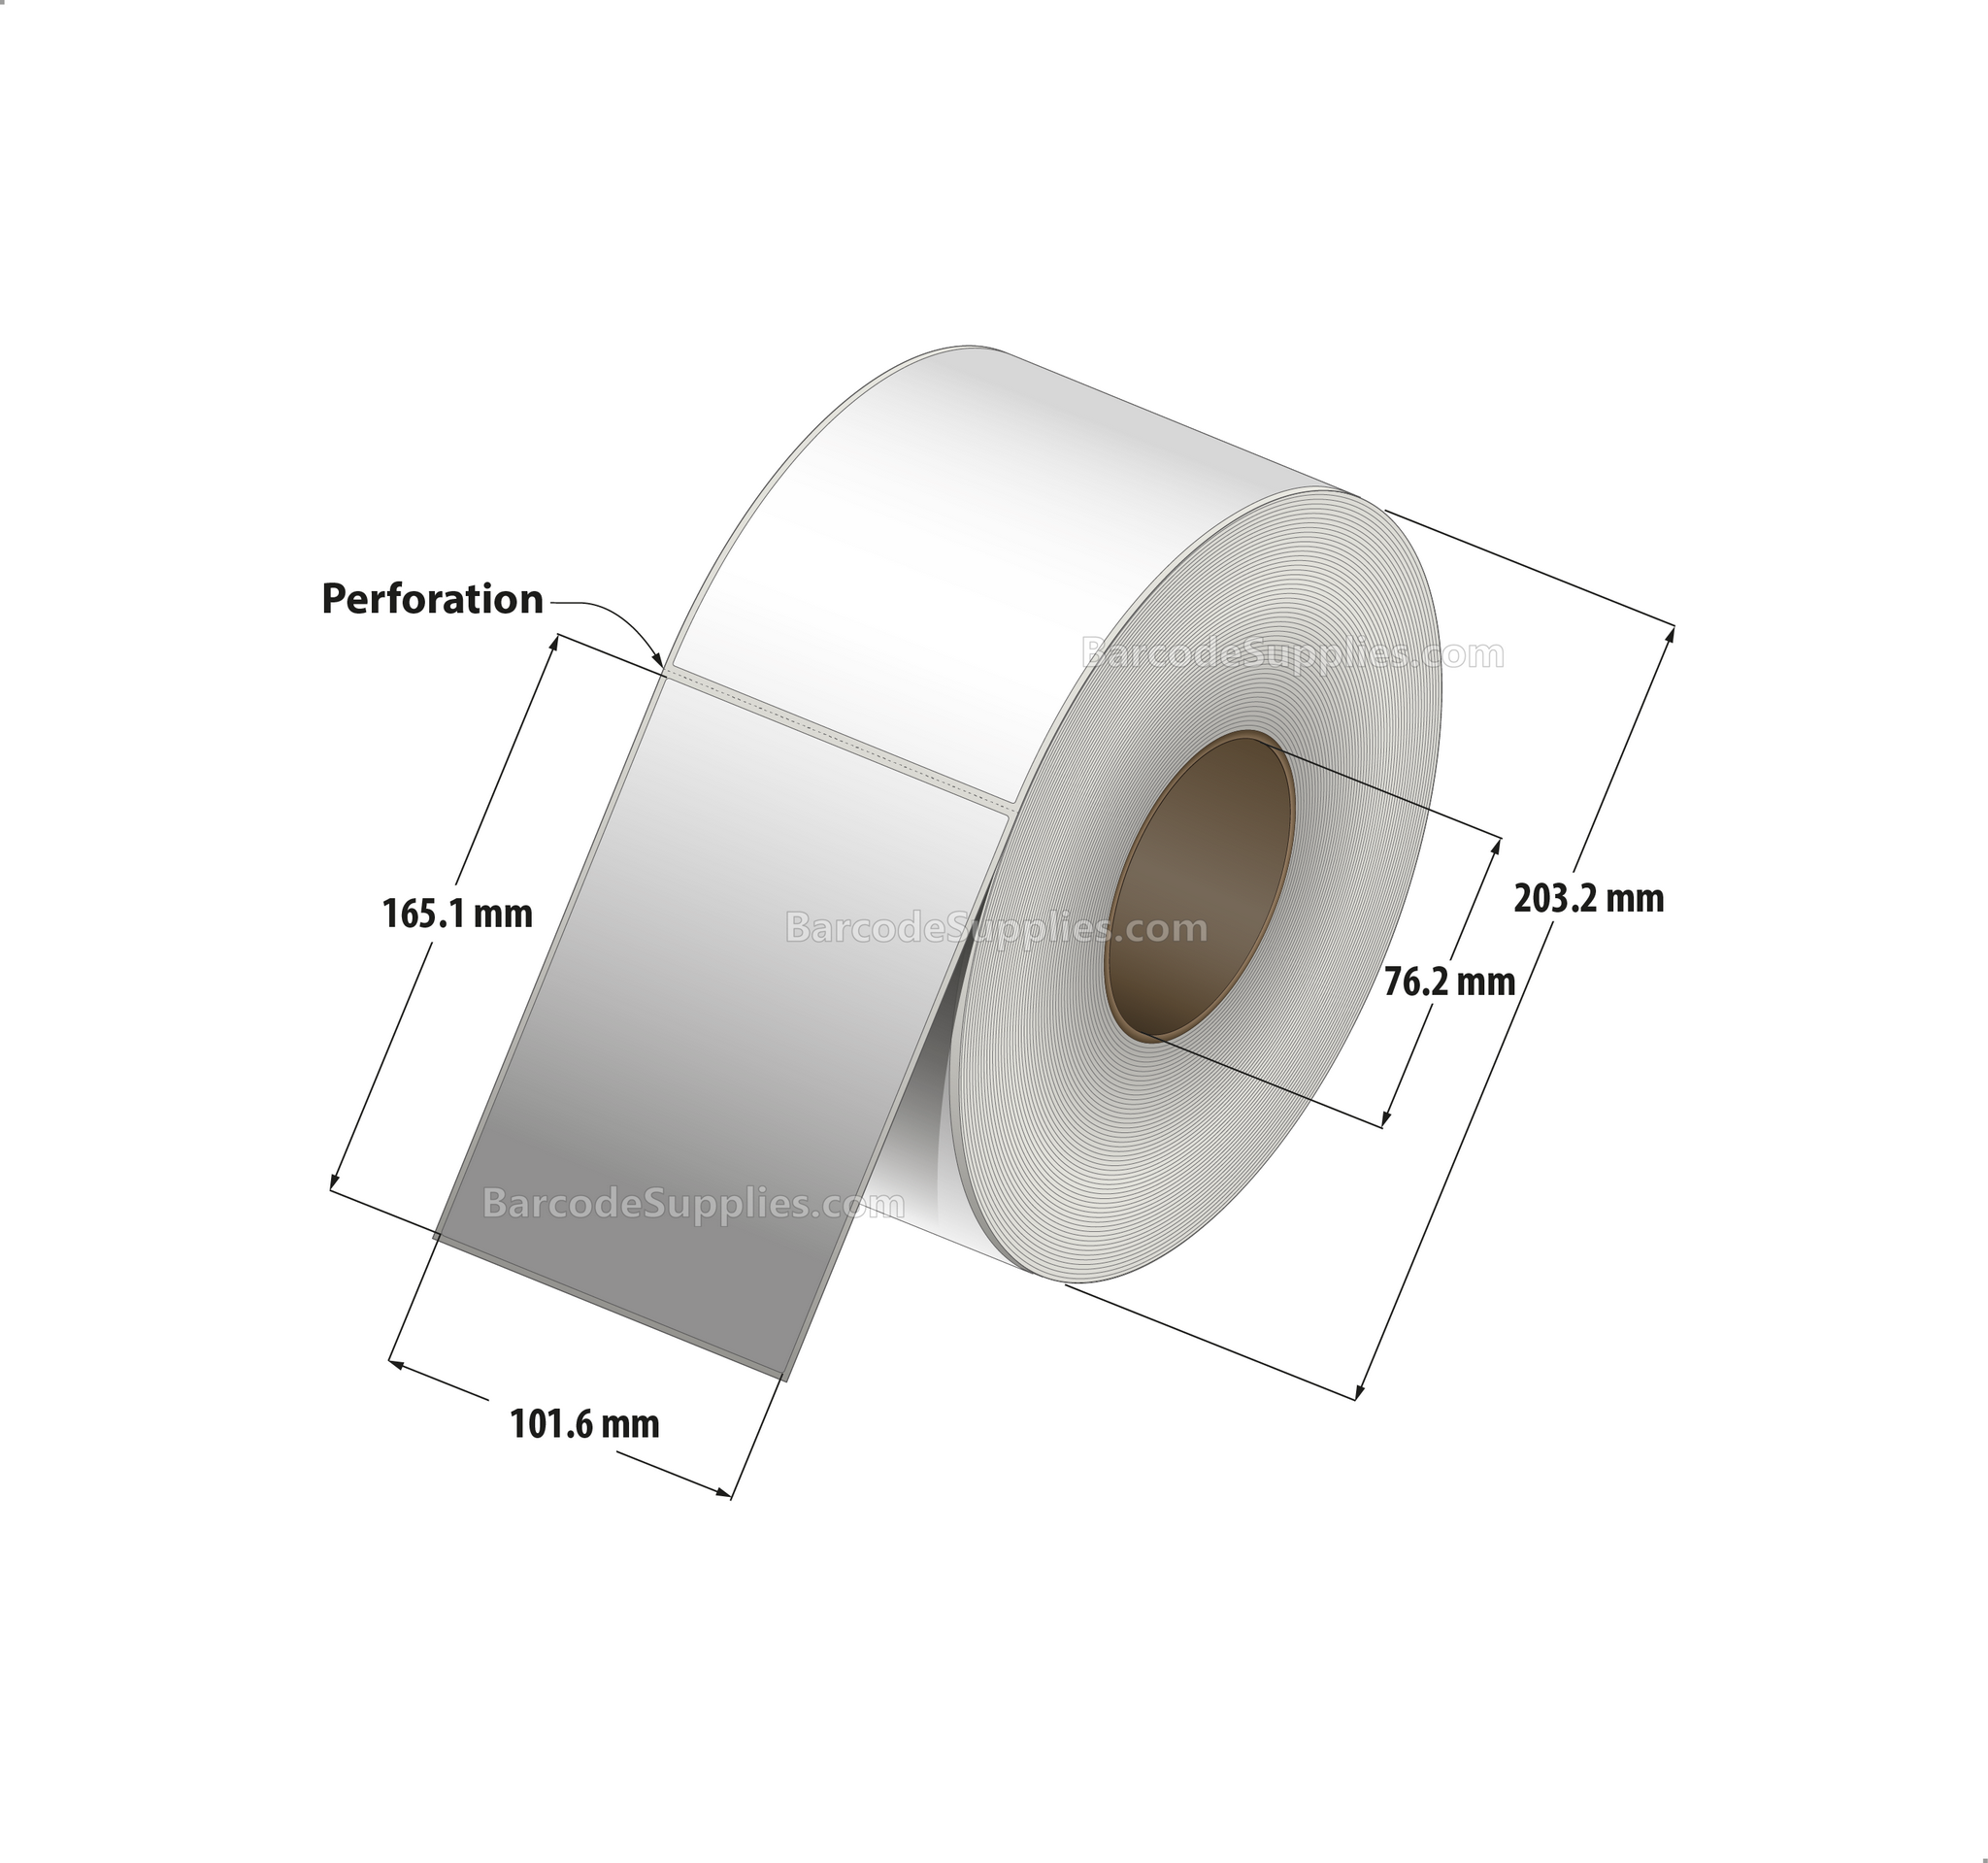 4 x 6.5 Direct Thermal White Labels With Rubber Adhesive - Perforated - 900 Labels Per Roll - Carton Of 4 Rolls - 3600 Labels Total - MPN: DT400650-3P